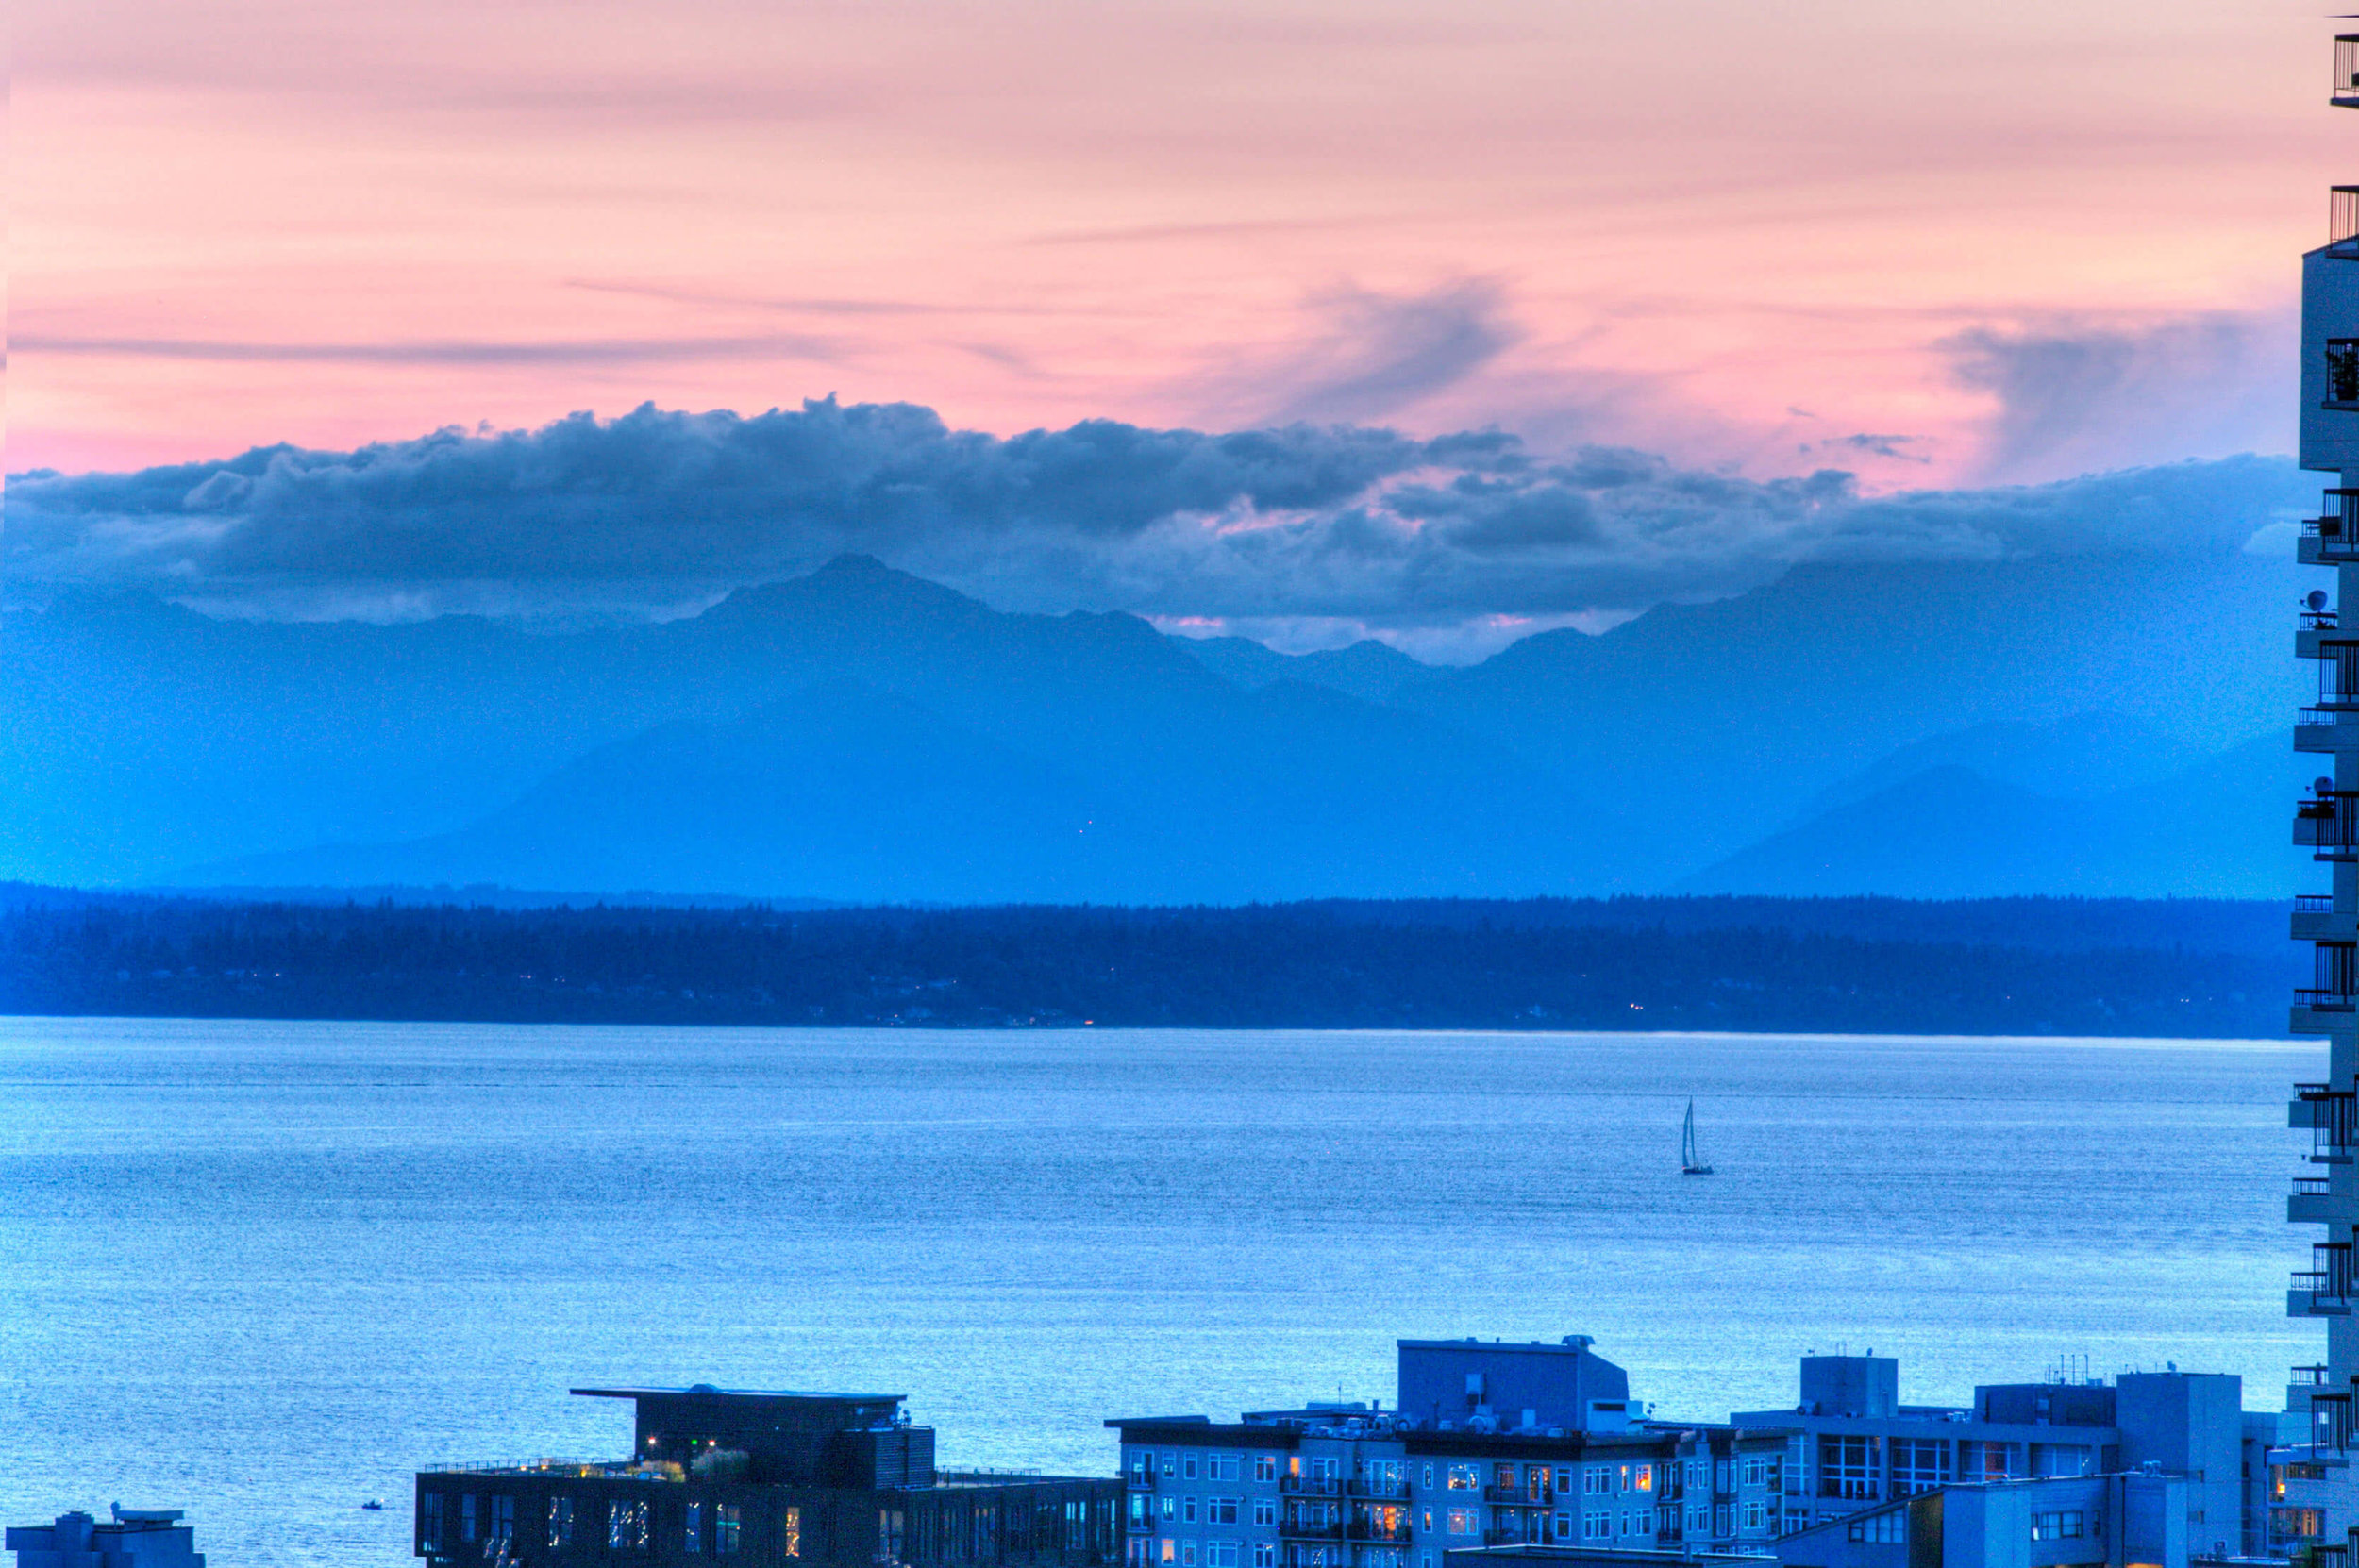 Escala-Luxury-Condo-For-Sale-Downtown-Seattle-Puget-Sound-Water-Views-Dusk.jpg